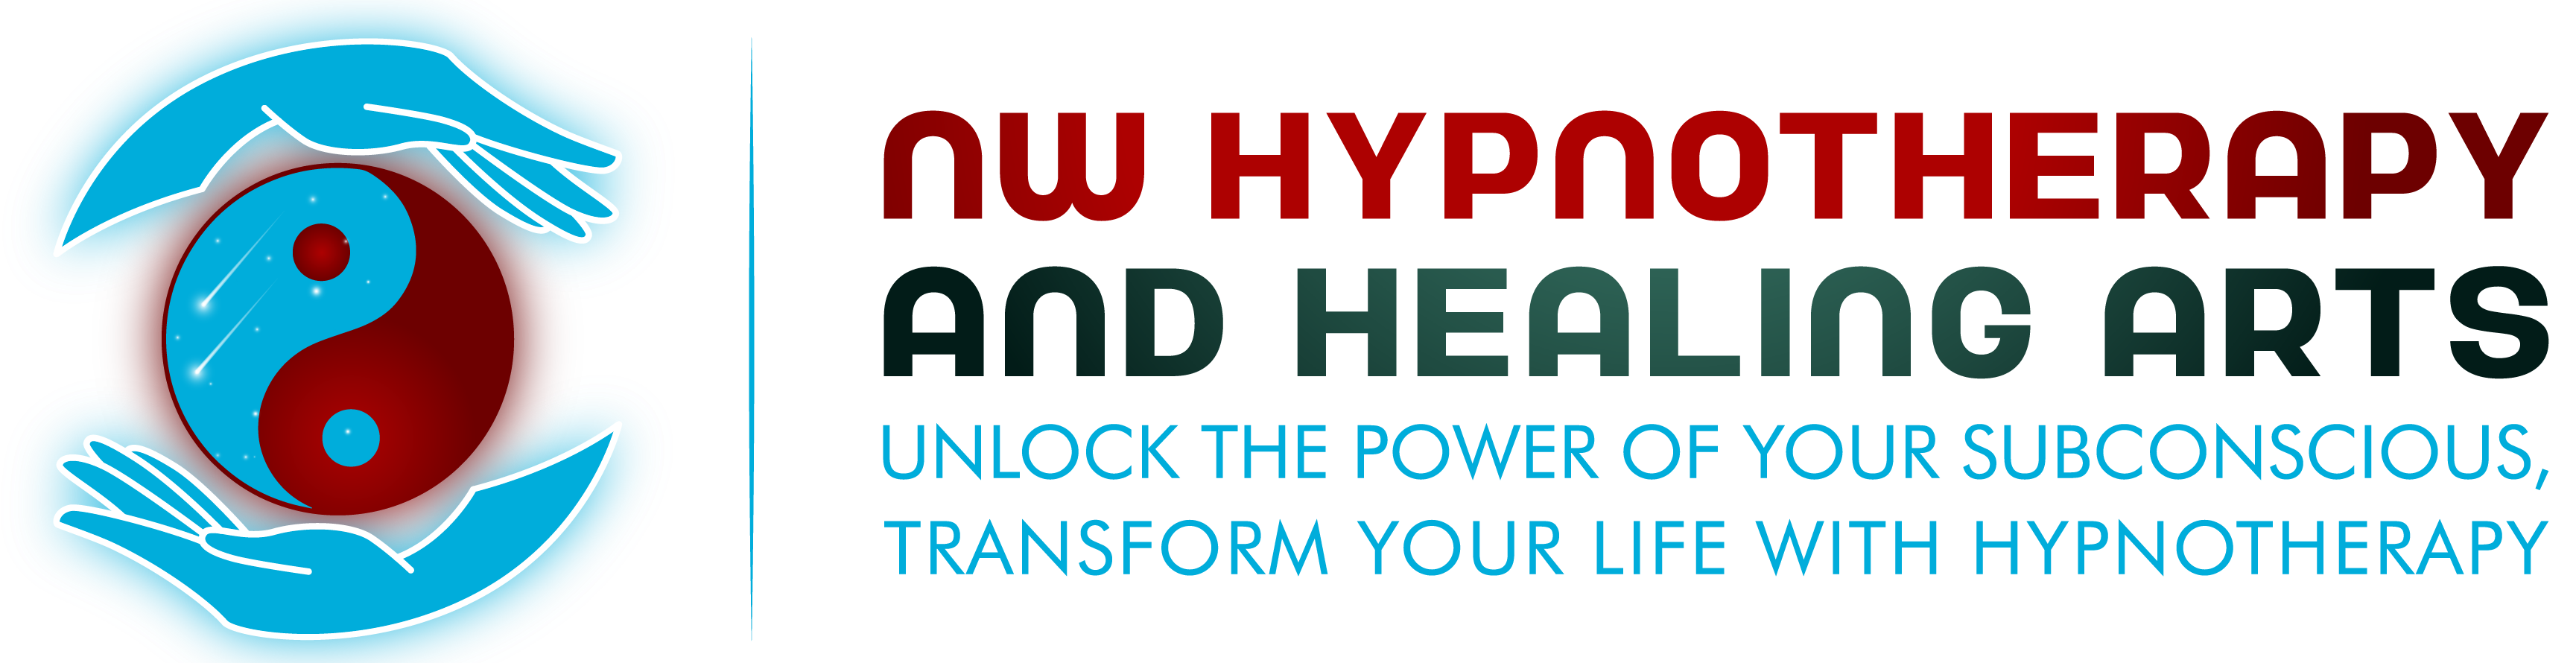 Kyle Kossen The Trusted Hypnotherapist In The USA NWmind